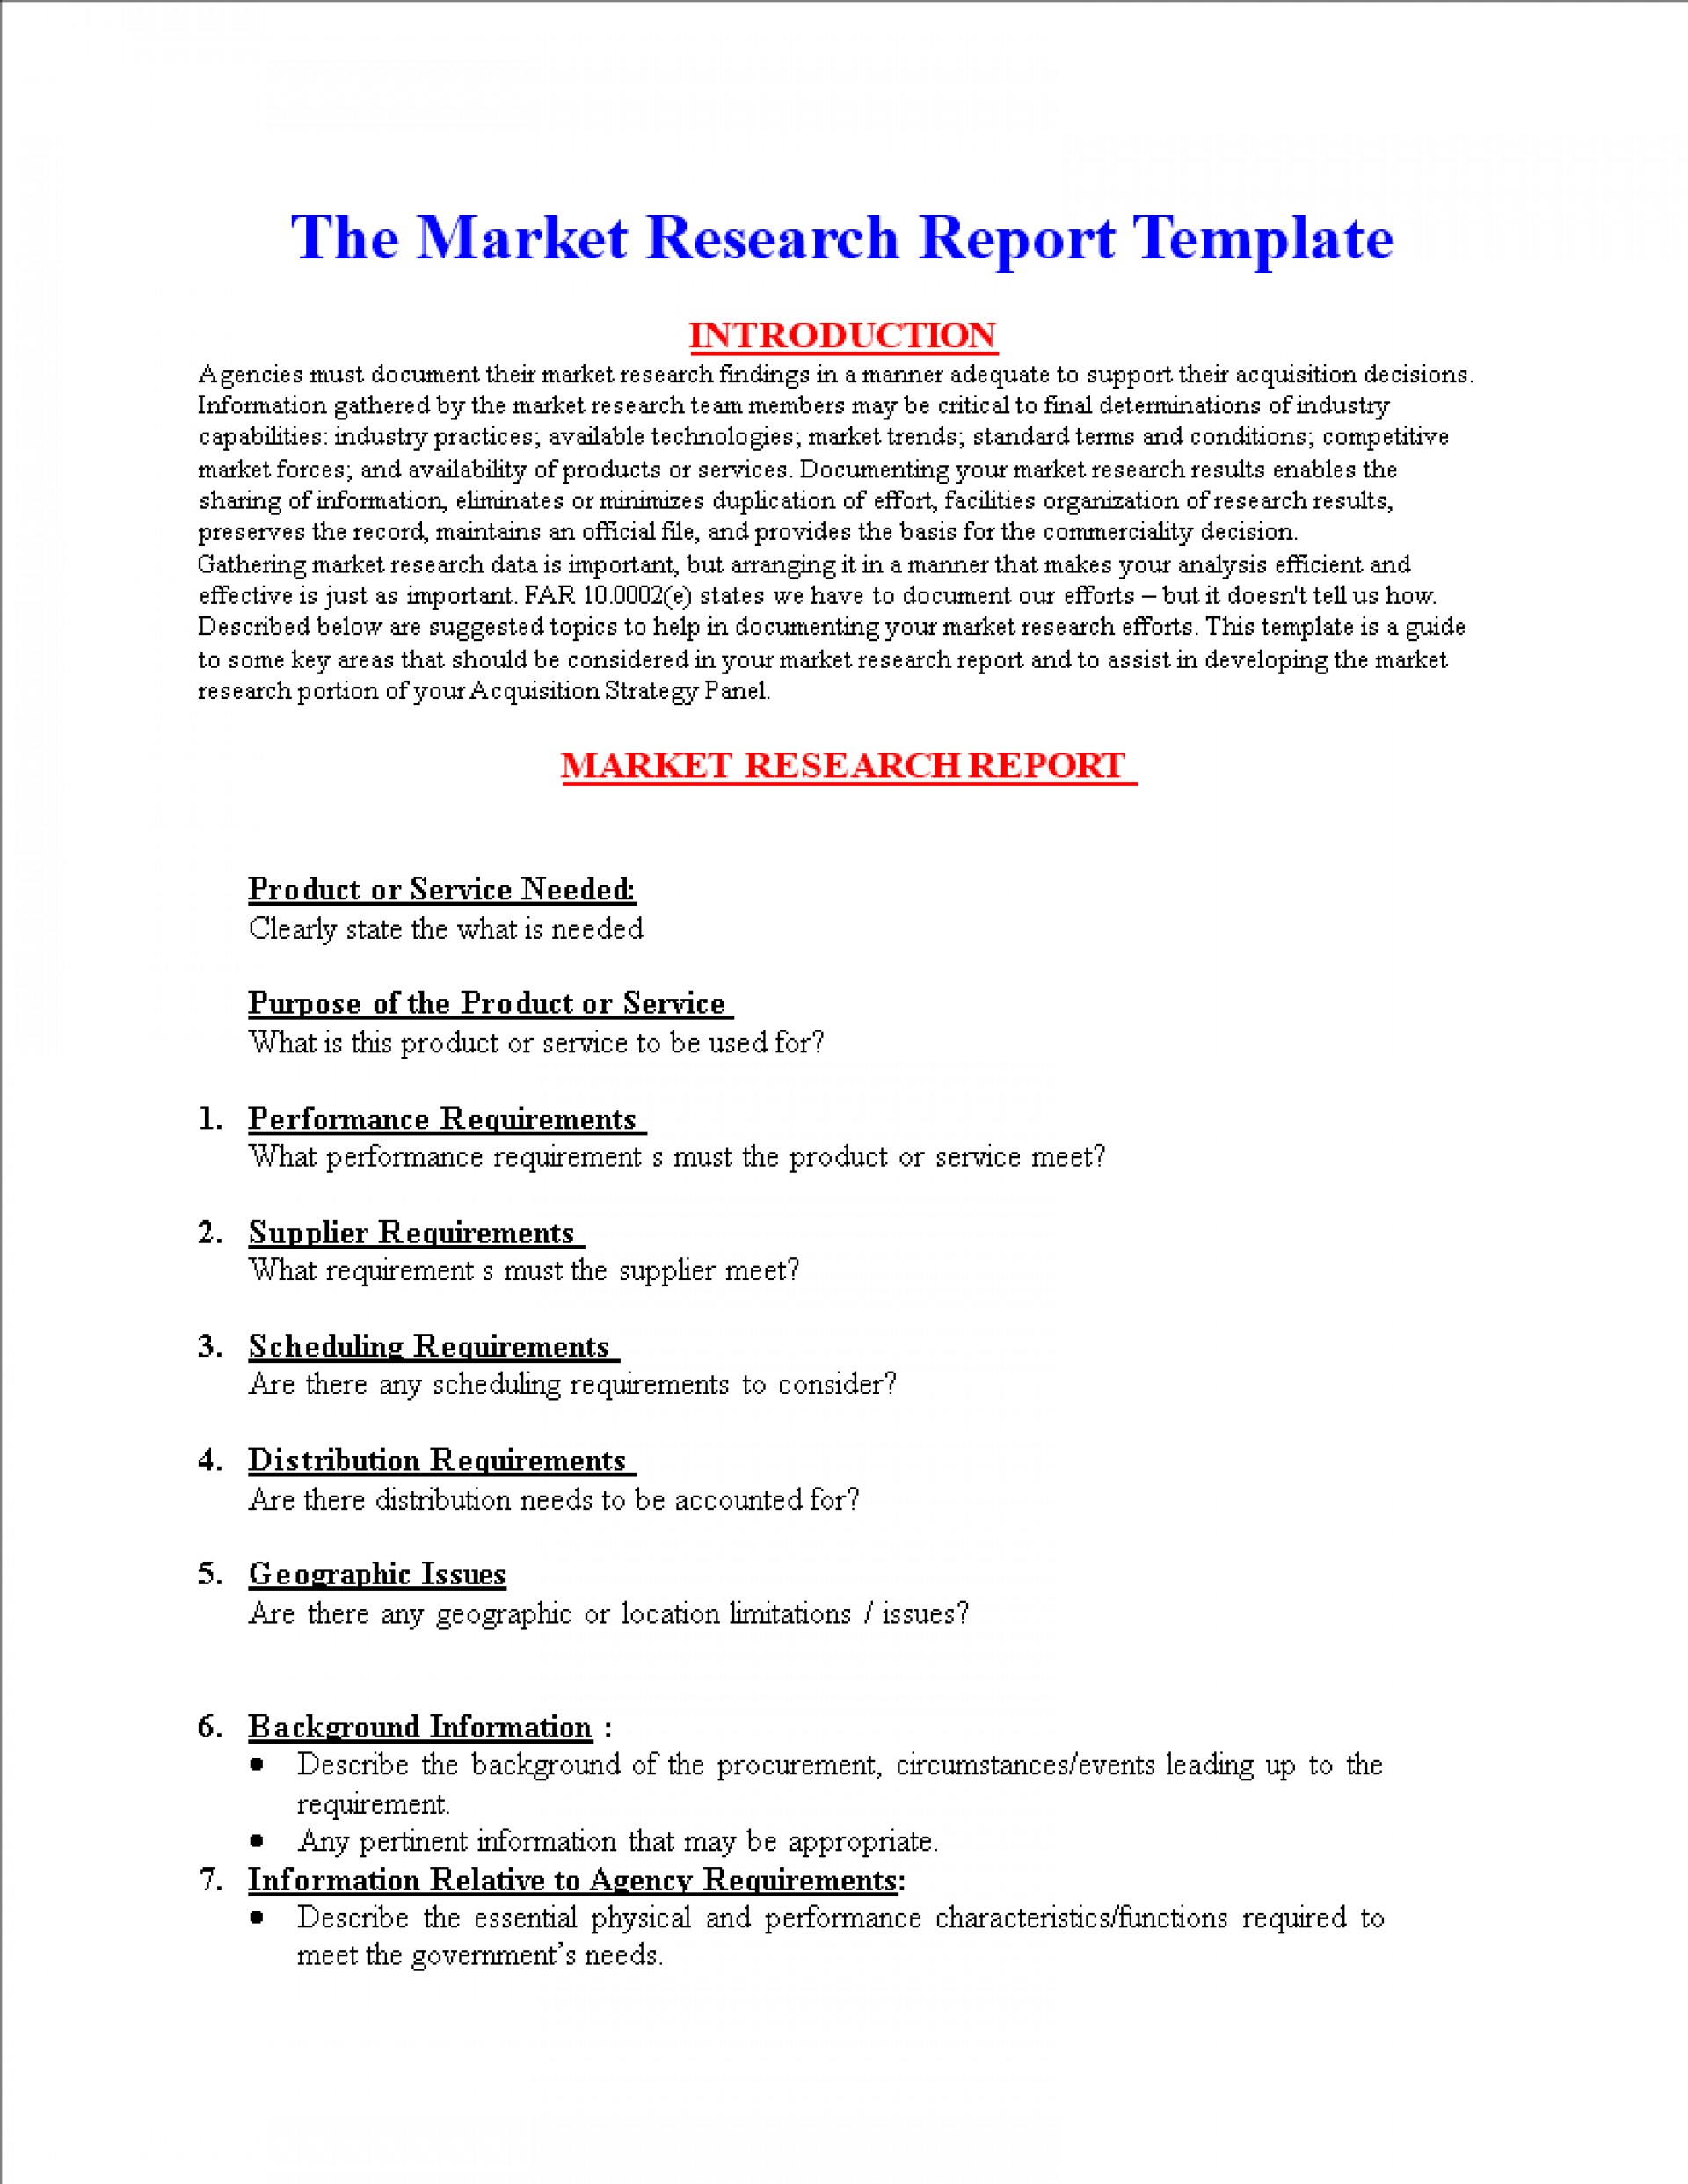 elements of market research report include